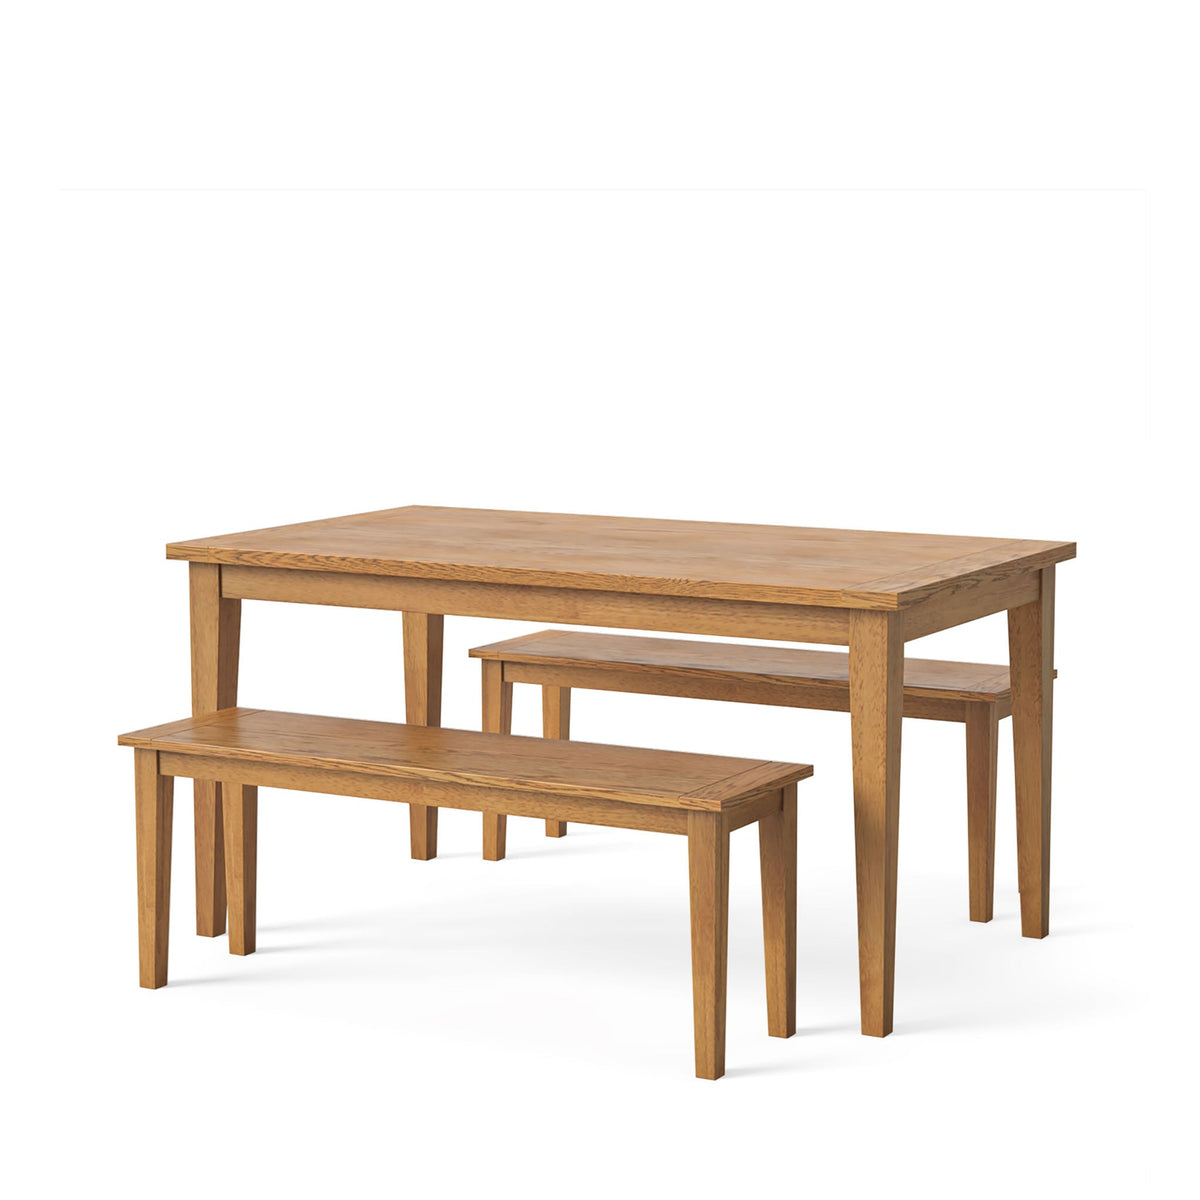 Fran Oak 1.5m Dining Set with Wooden Dining Benches